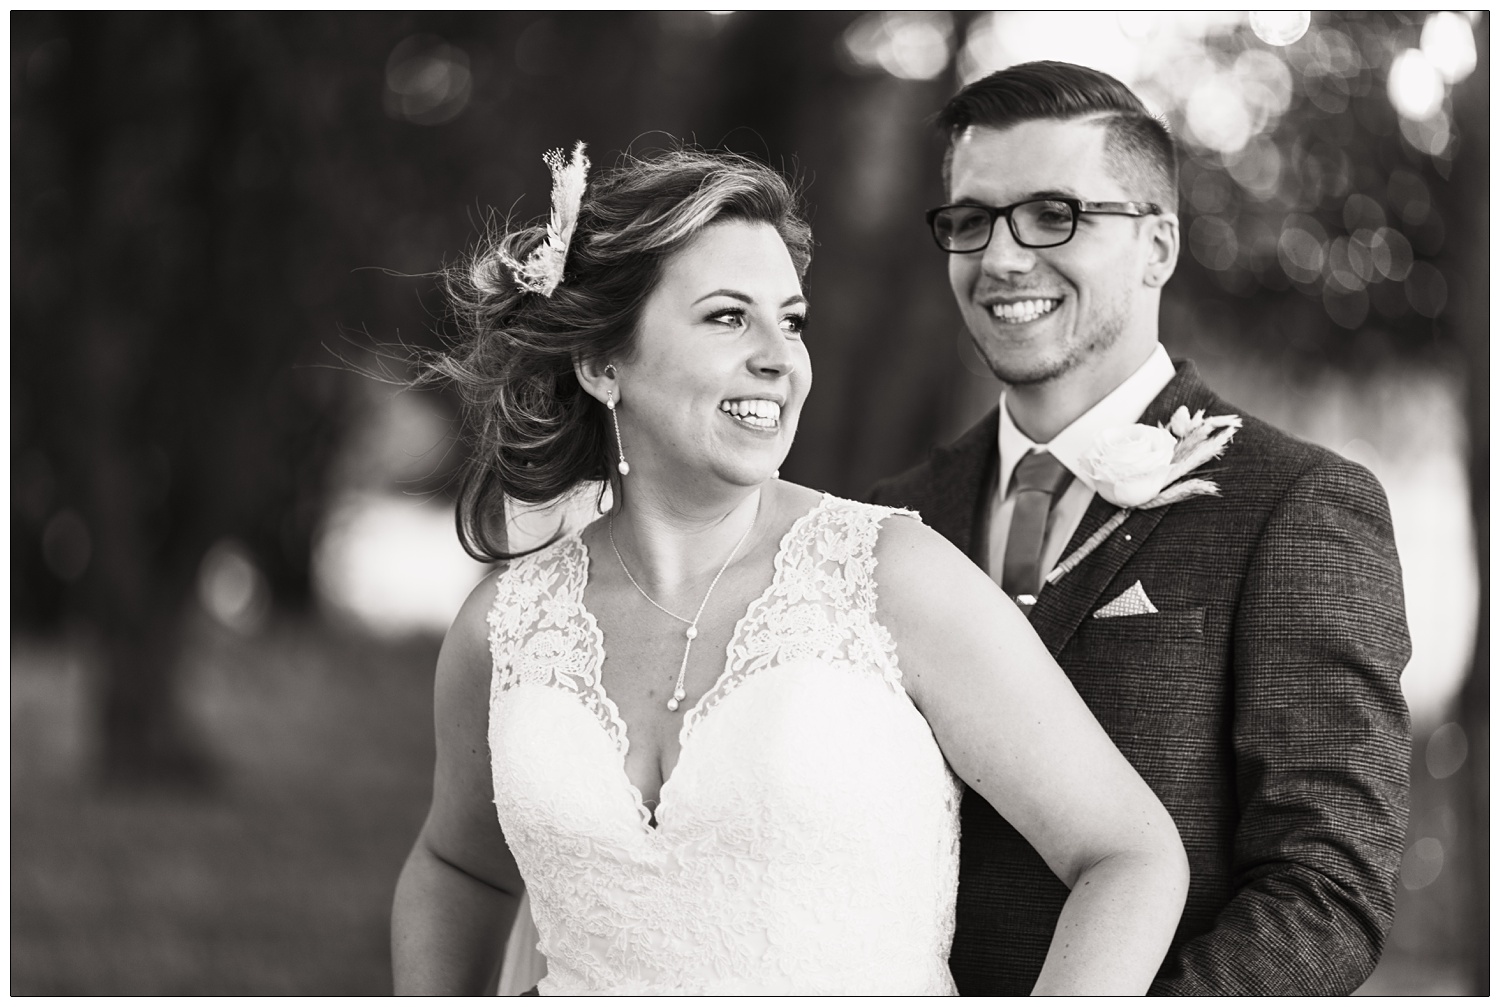 A portrait of a bride and groom. The bride is the foreground and smiling naturally.